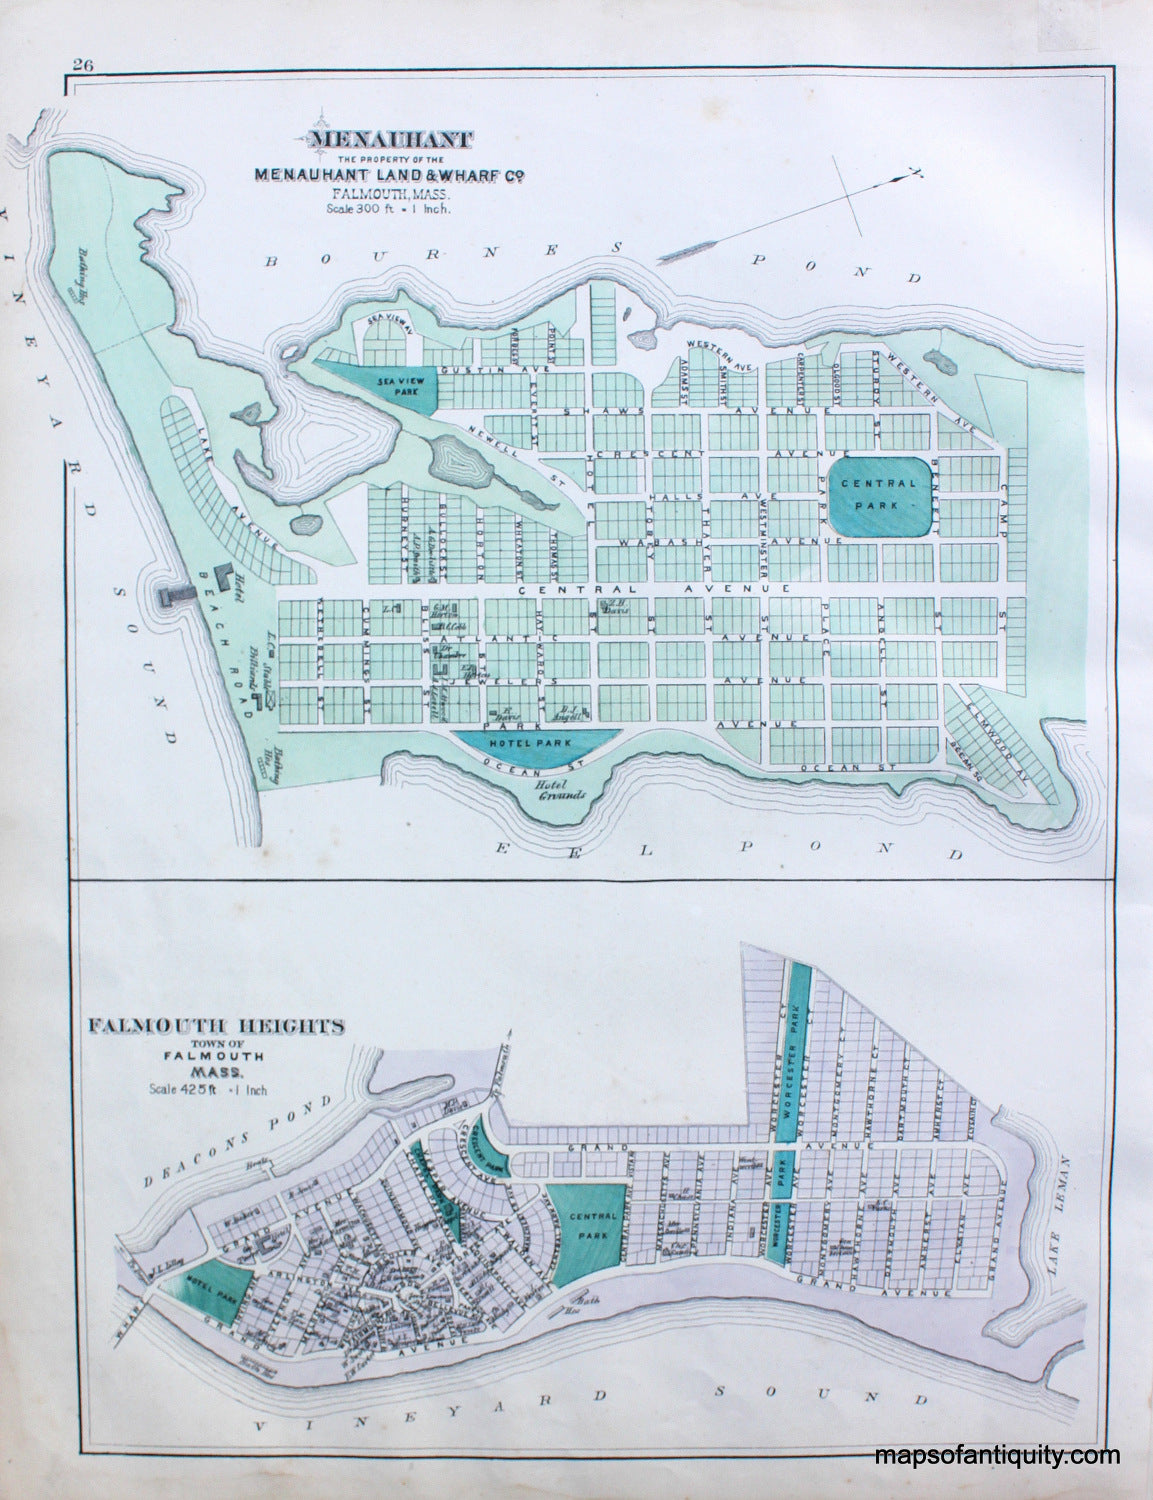 Reproduction-Menauhant-Falmouth-Heights-p.-26-Town-and-Village-Maps-Atlas-of-Barnstable-County-Walker-1880.---Reproduction-Reproductions-Cape-Cod-and-Islands-Reproduction--Maps-Of-Antiquity